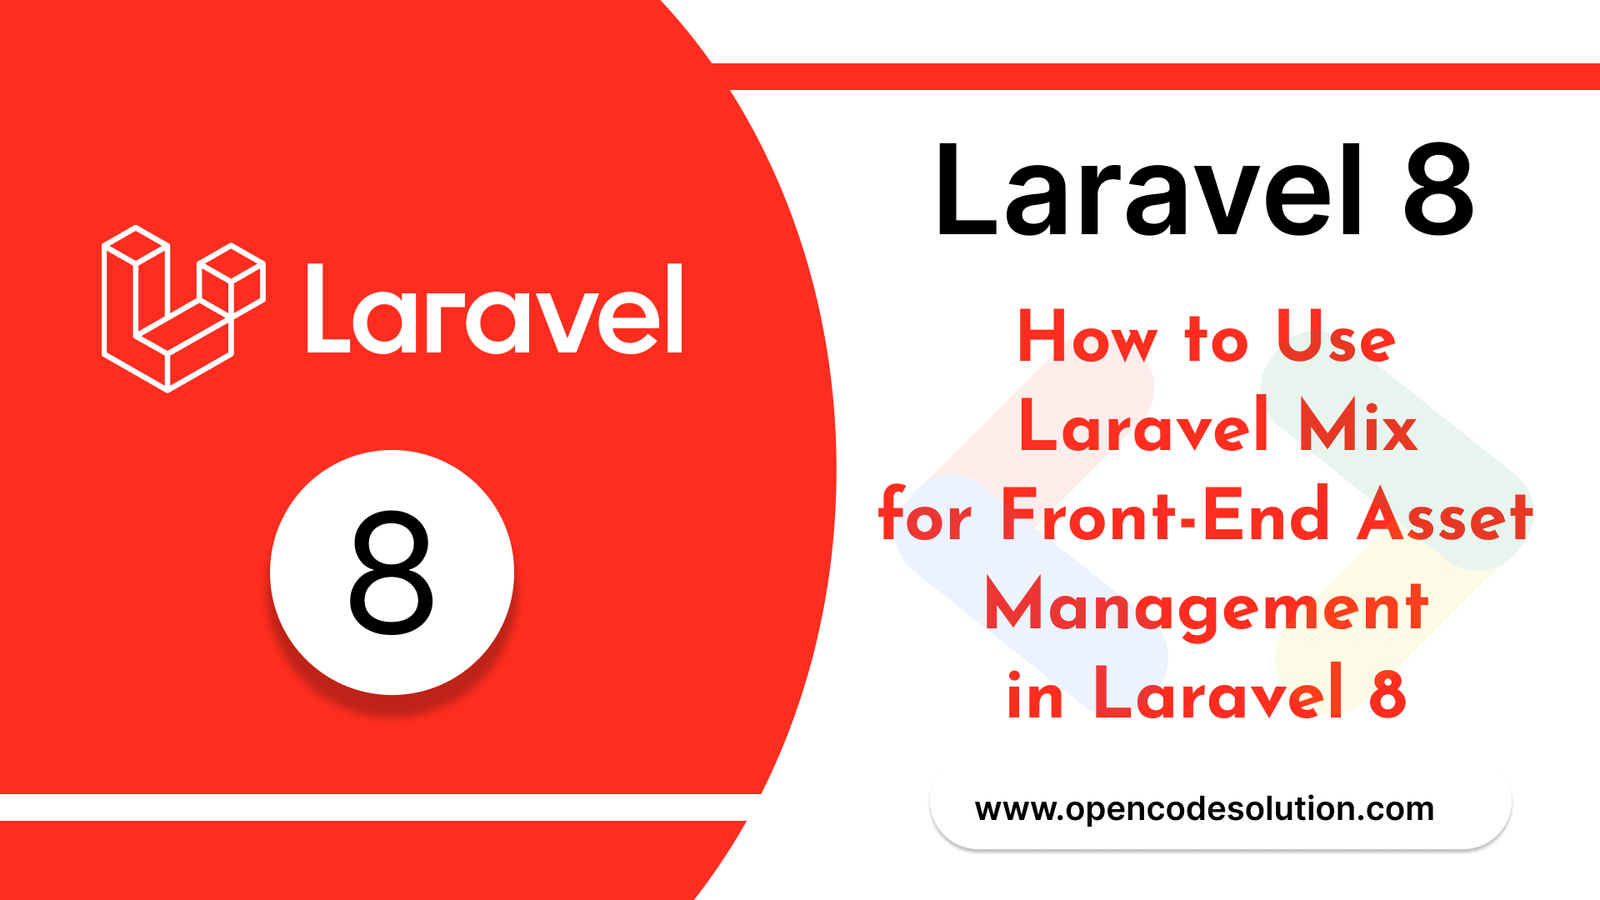 Complete Guide: How to Use Laravel Mix for Front-End Asset Management in Laravel 8